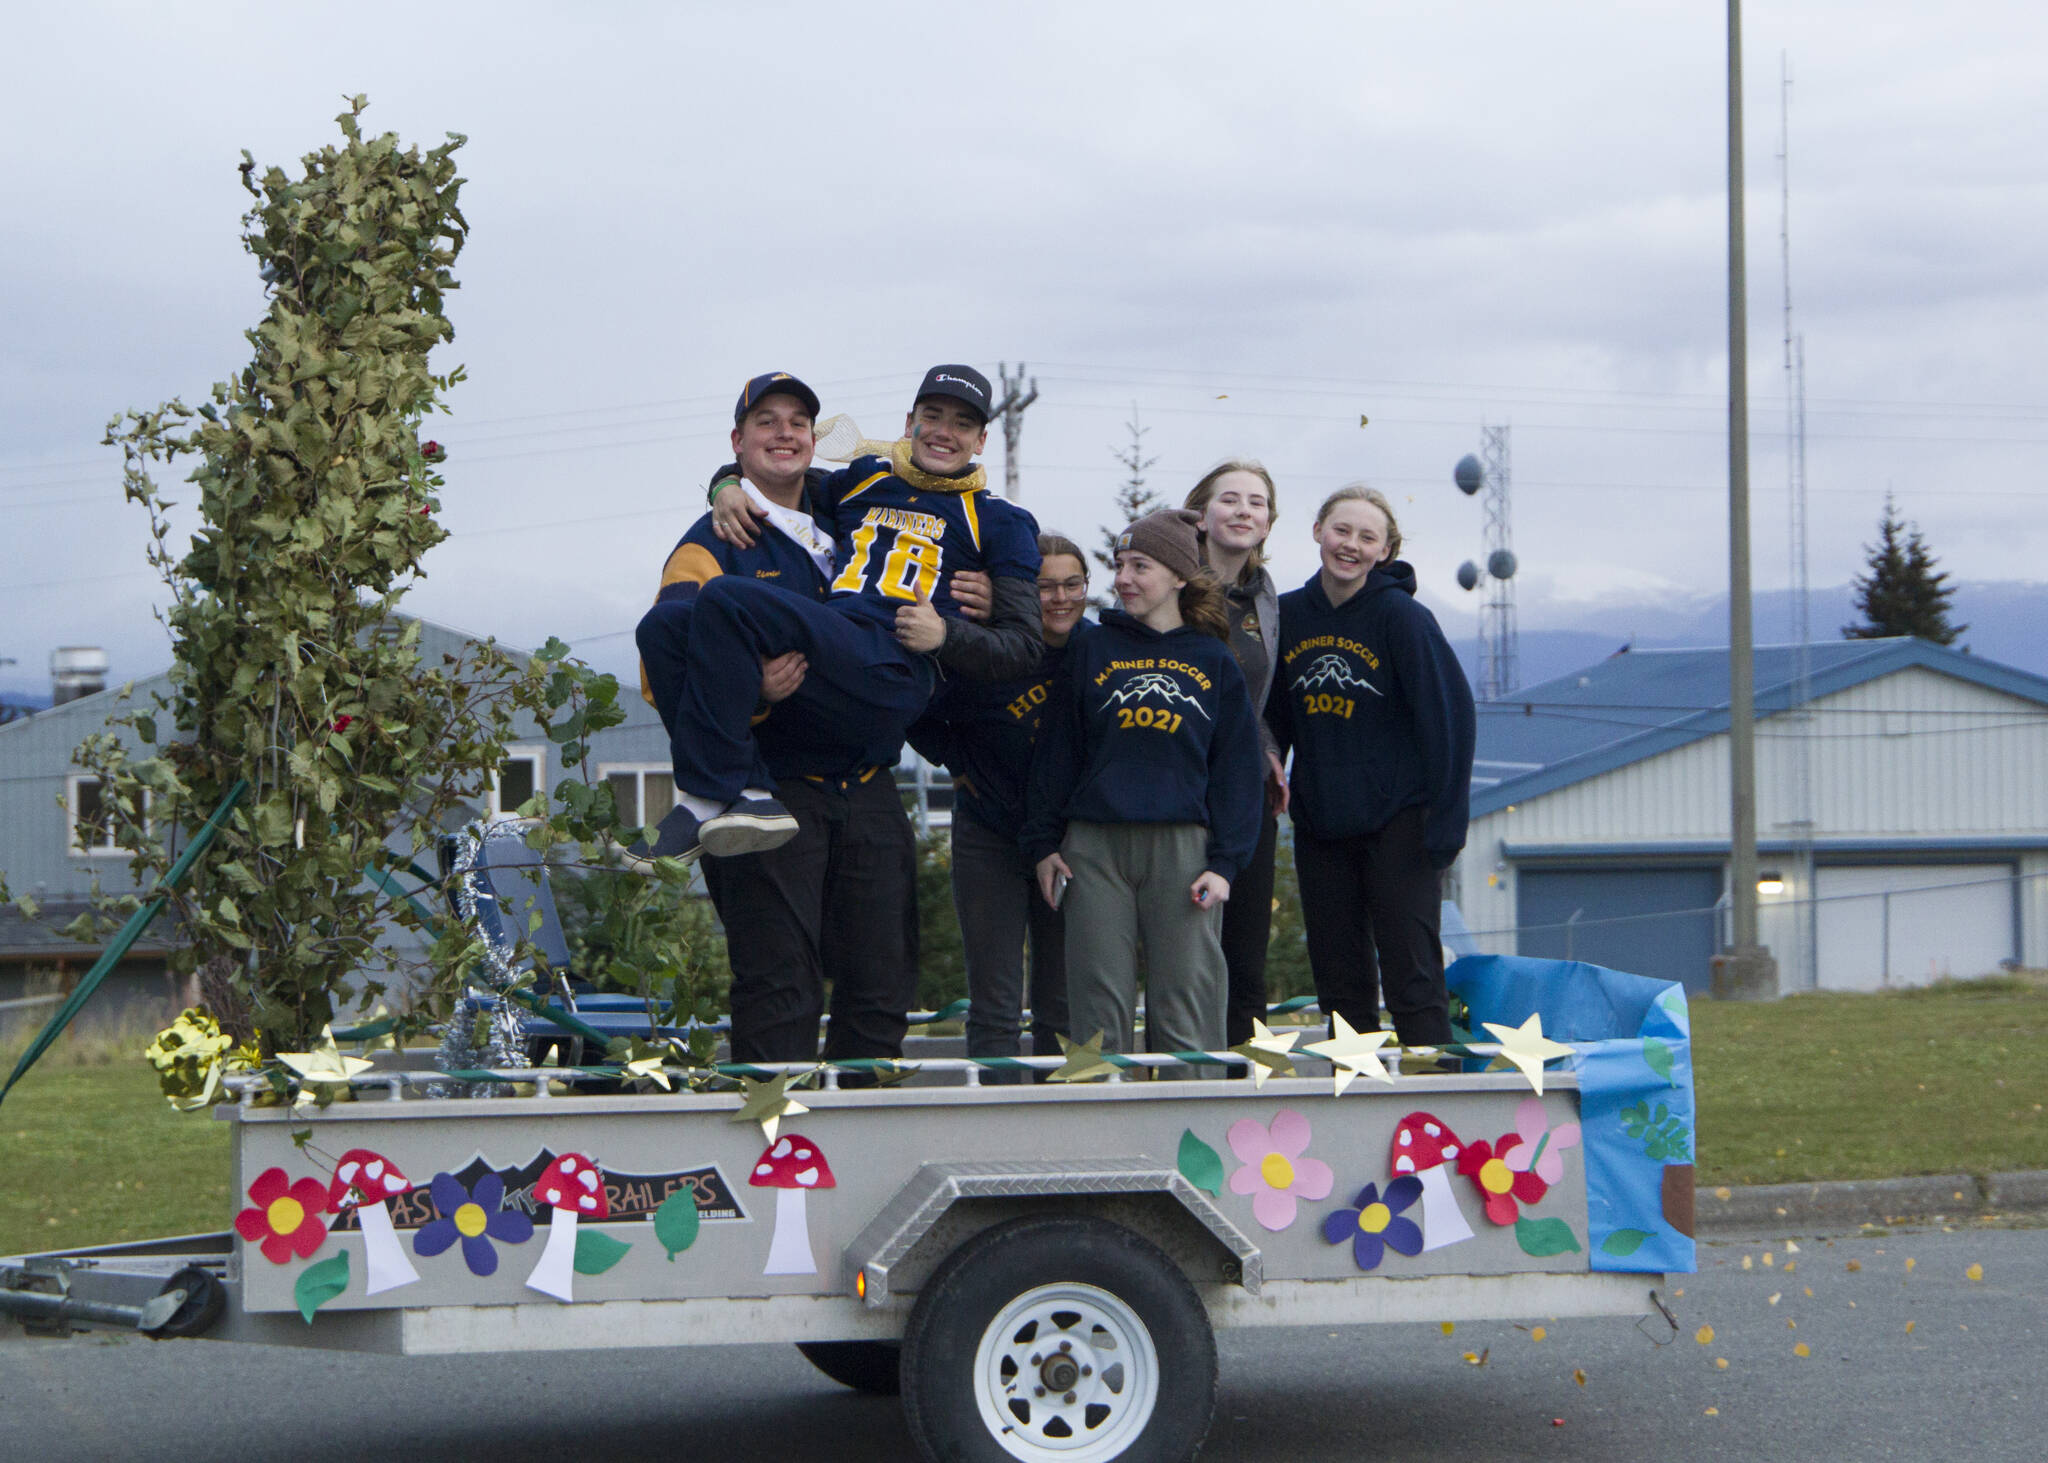 The Homer High School juniors pose on their float during the homecoming parade Friday, Oct. 1. (Photo by Sarah Knapp/ Homer News)